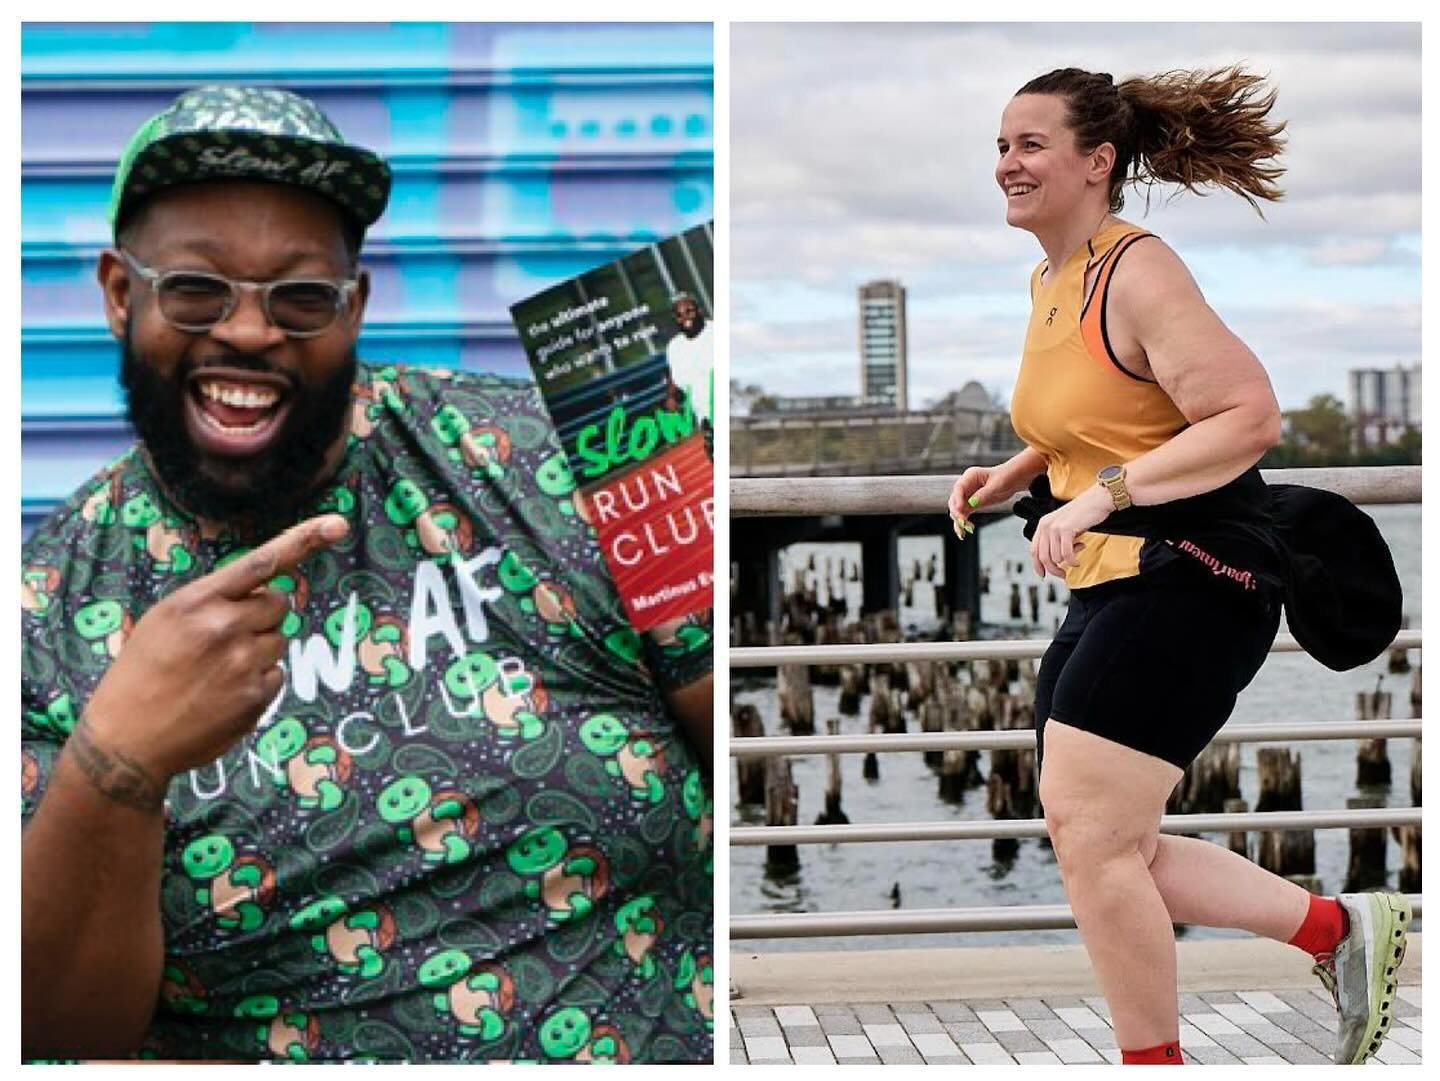 This May we&rsquo;re having a panel with Ashley Dean and Martinus Evan of Slow AF Run Club to discuss back-of-the-pack runners and pace inclusivity. 

Ashley Dean is a long-distance runner, weight lifter, and recent swimmer. She runs with Lone Wolf T